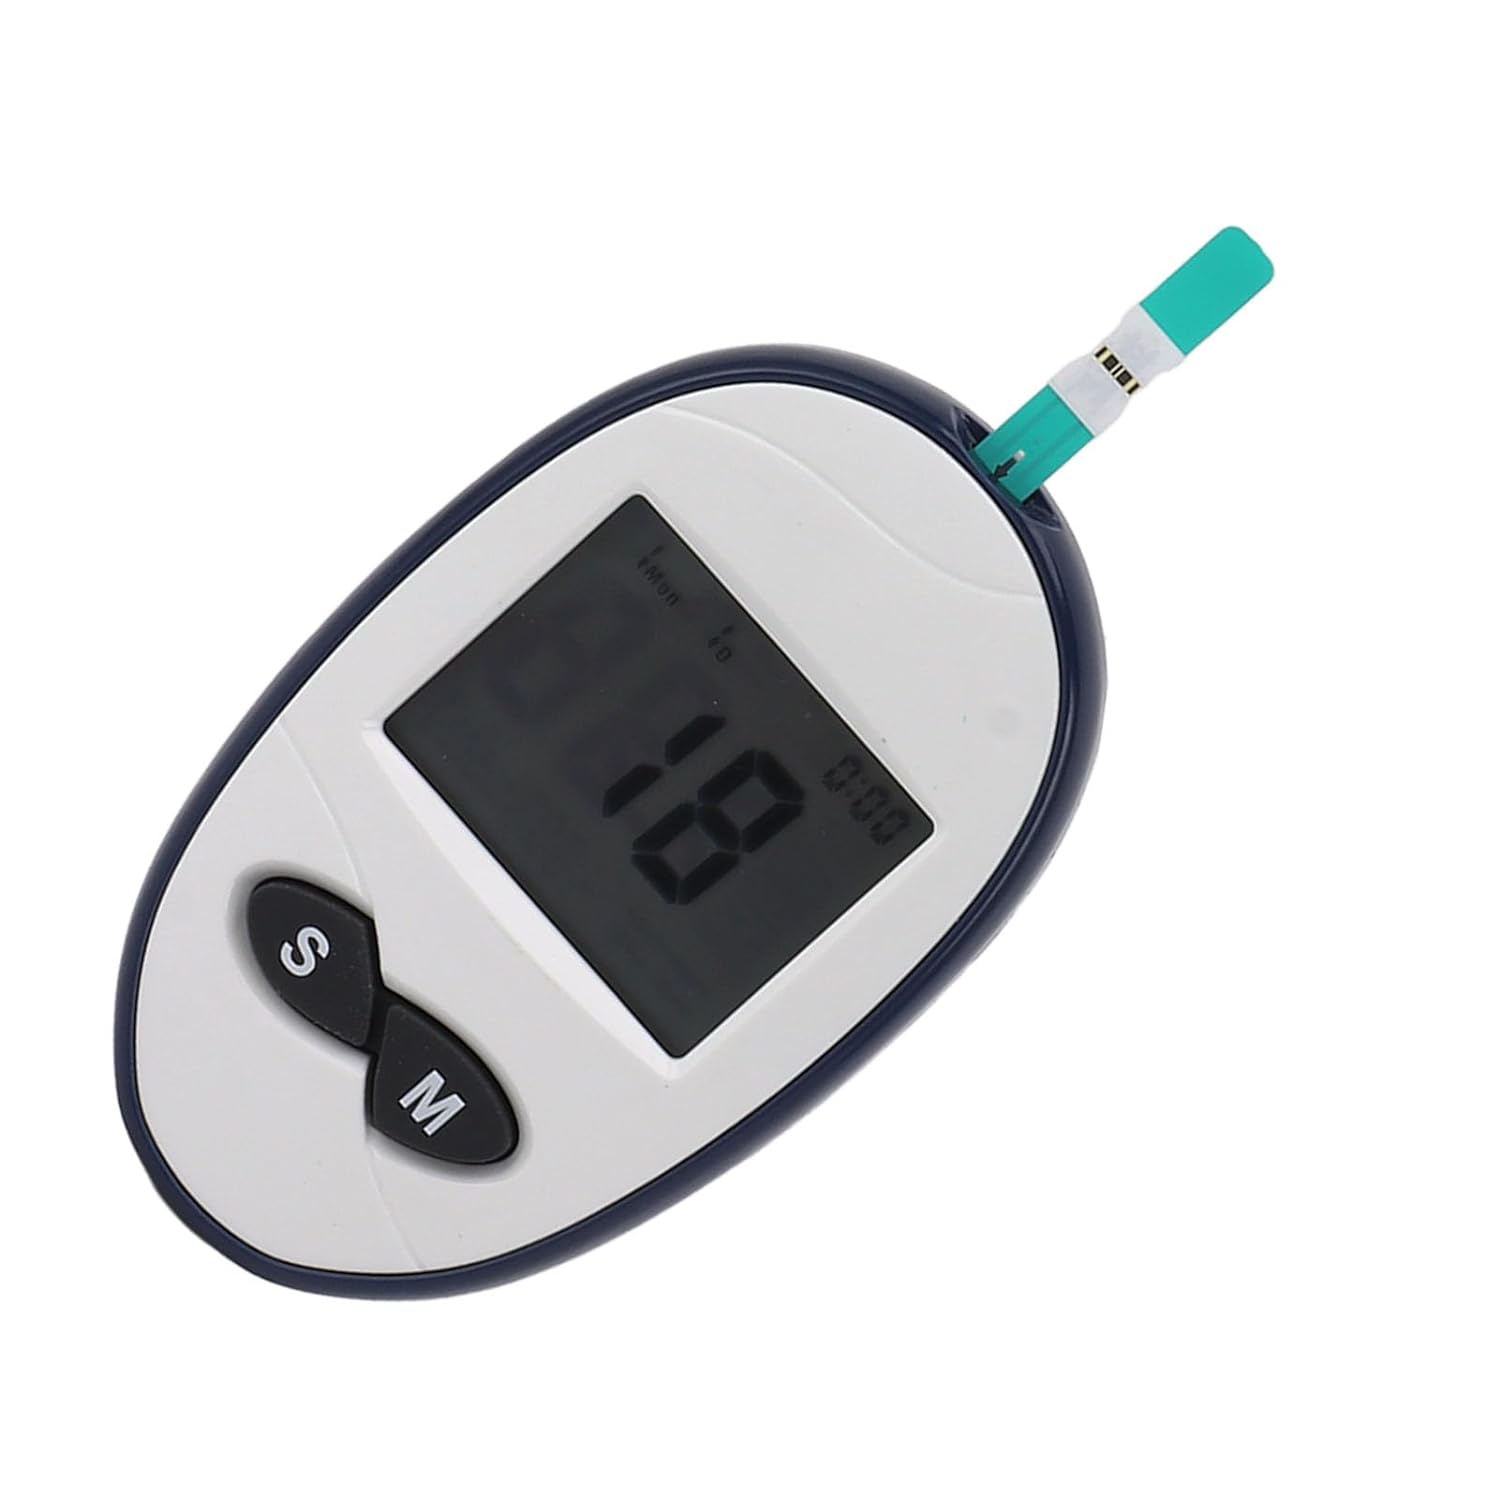 High Accuracy Blood Glucose Meter Review